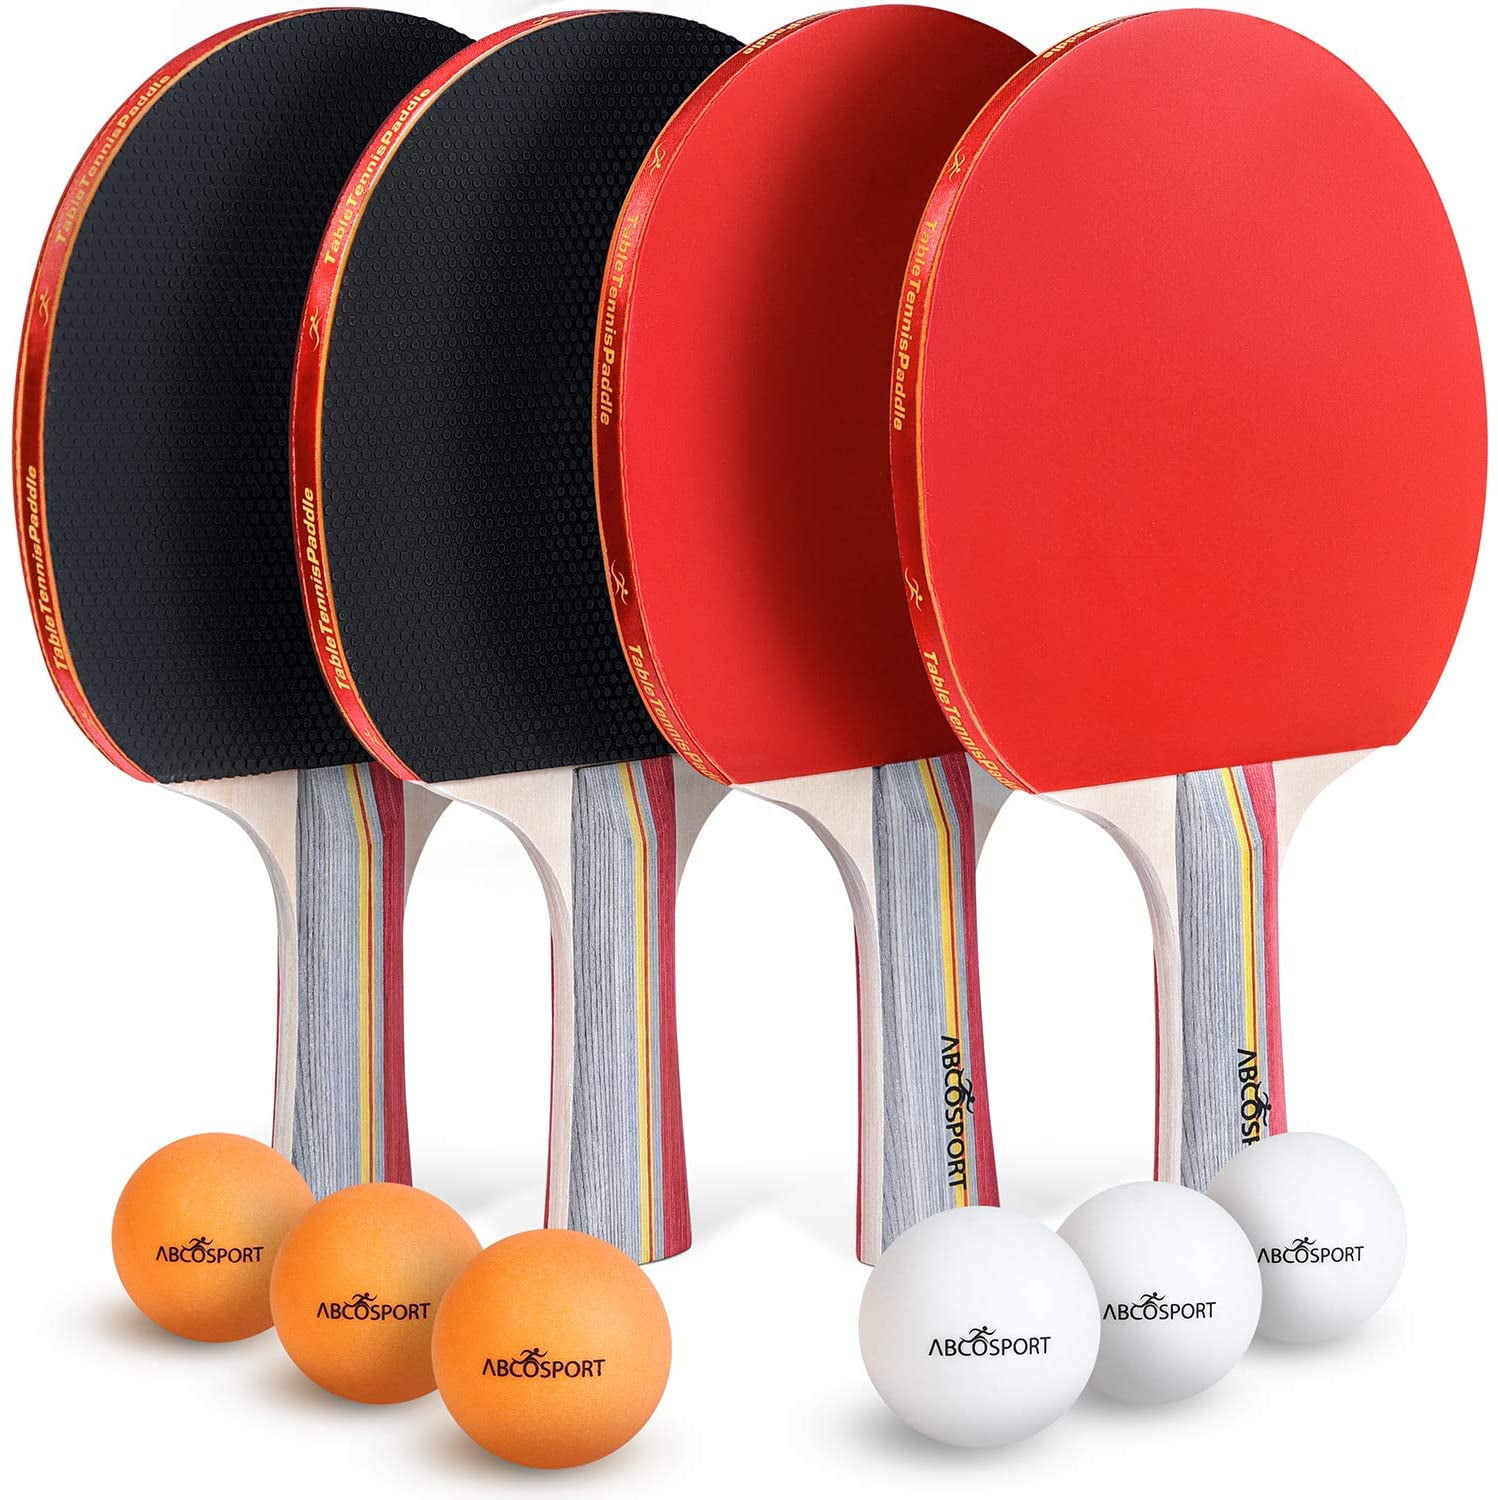 Details about   Glymnis Ping Pong Paddle Set Of 4 Premium Table Tennis Rackets With 8 Game Balls 